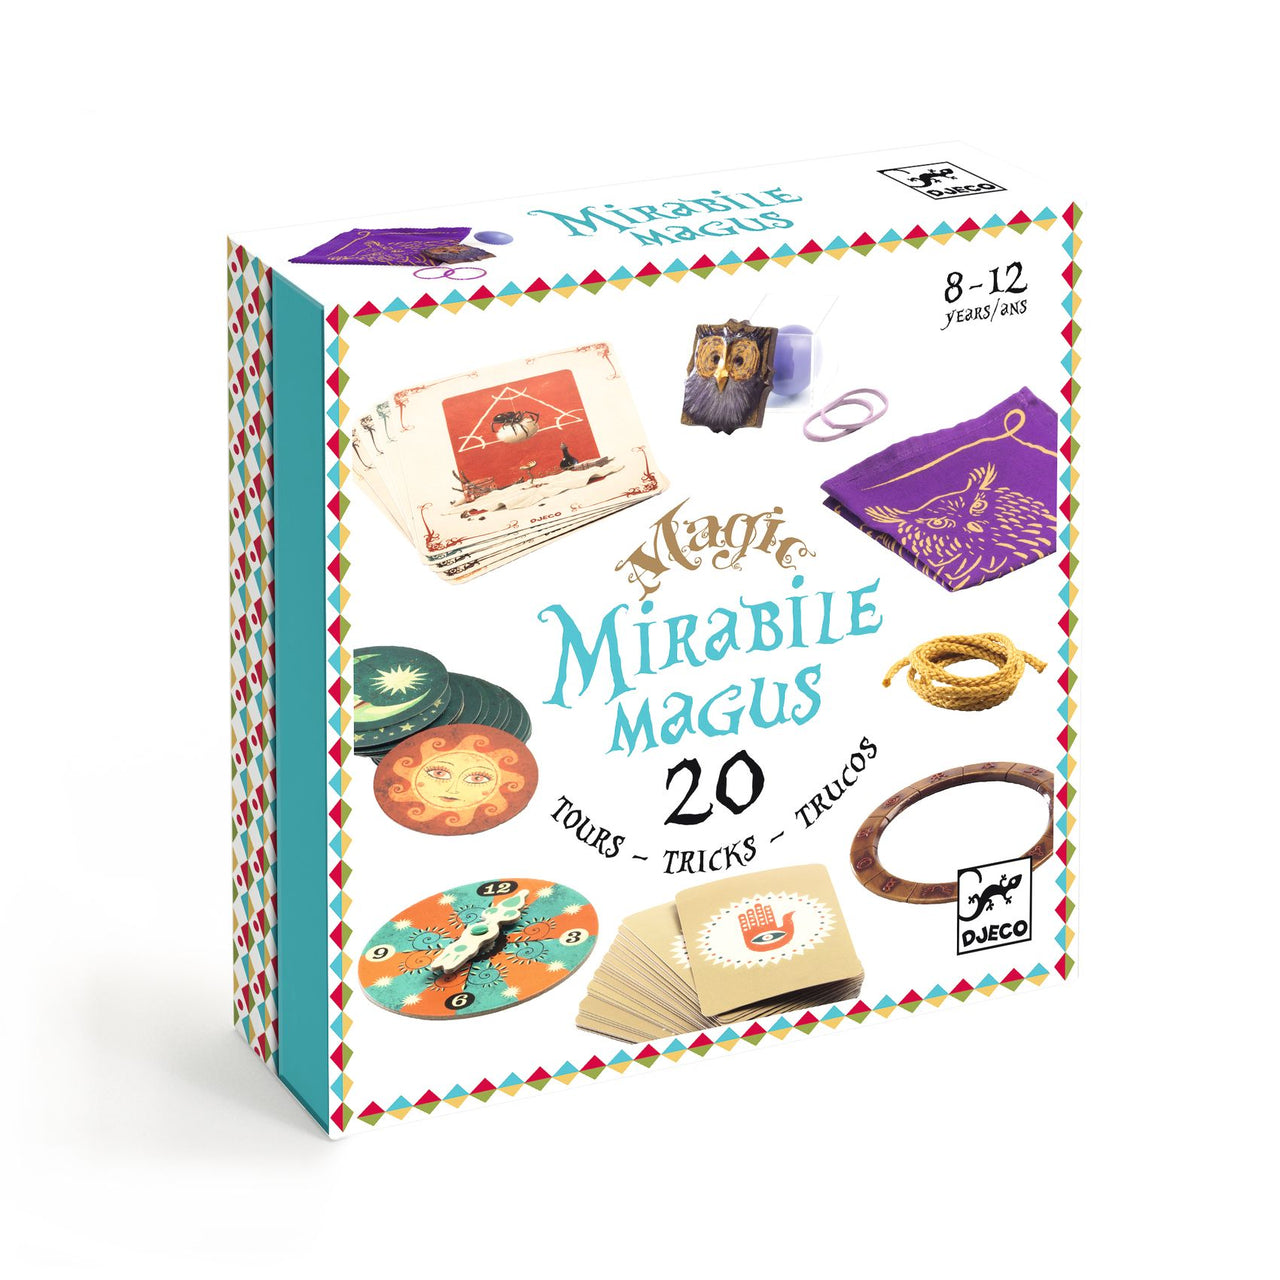 Disappear, transform, create illusions and make predictions... Mirabile Magus is a kit with everything magicians need to get started and hone their skills.      20 different magic tricks are included in the kit.     The contents were developed by professional magicians and designed by Djeco.